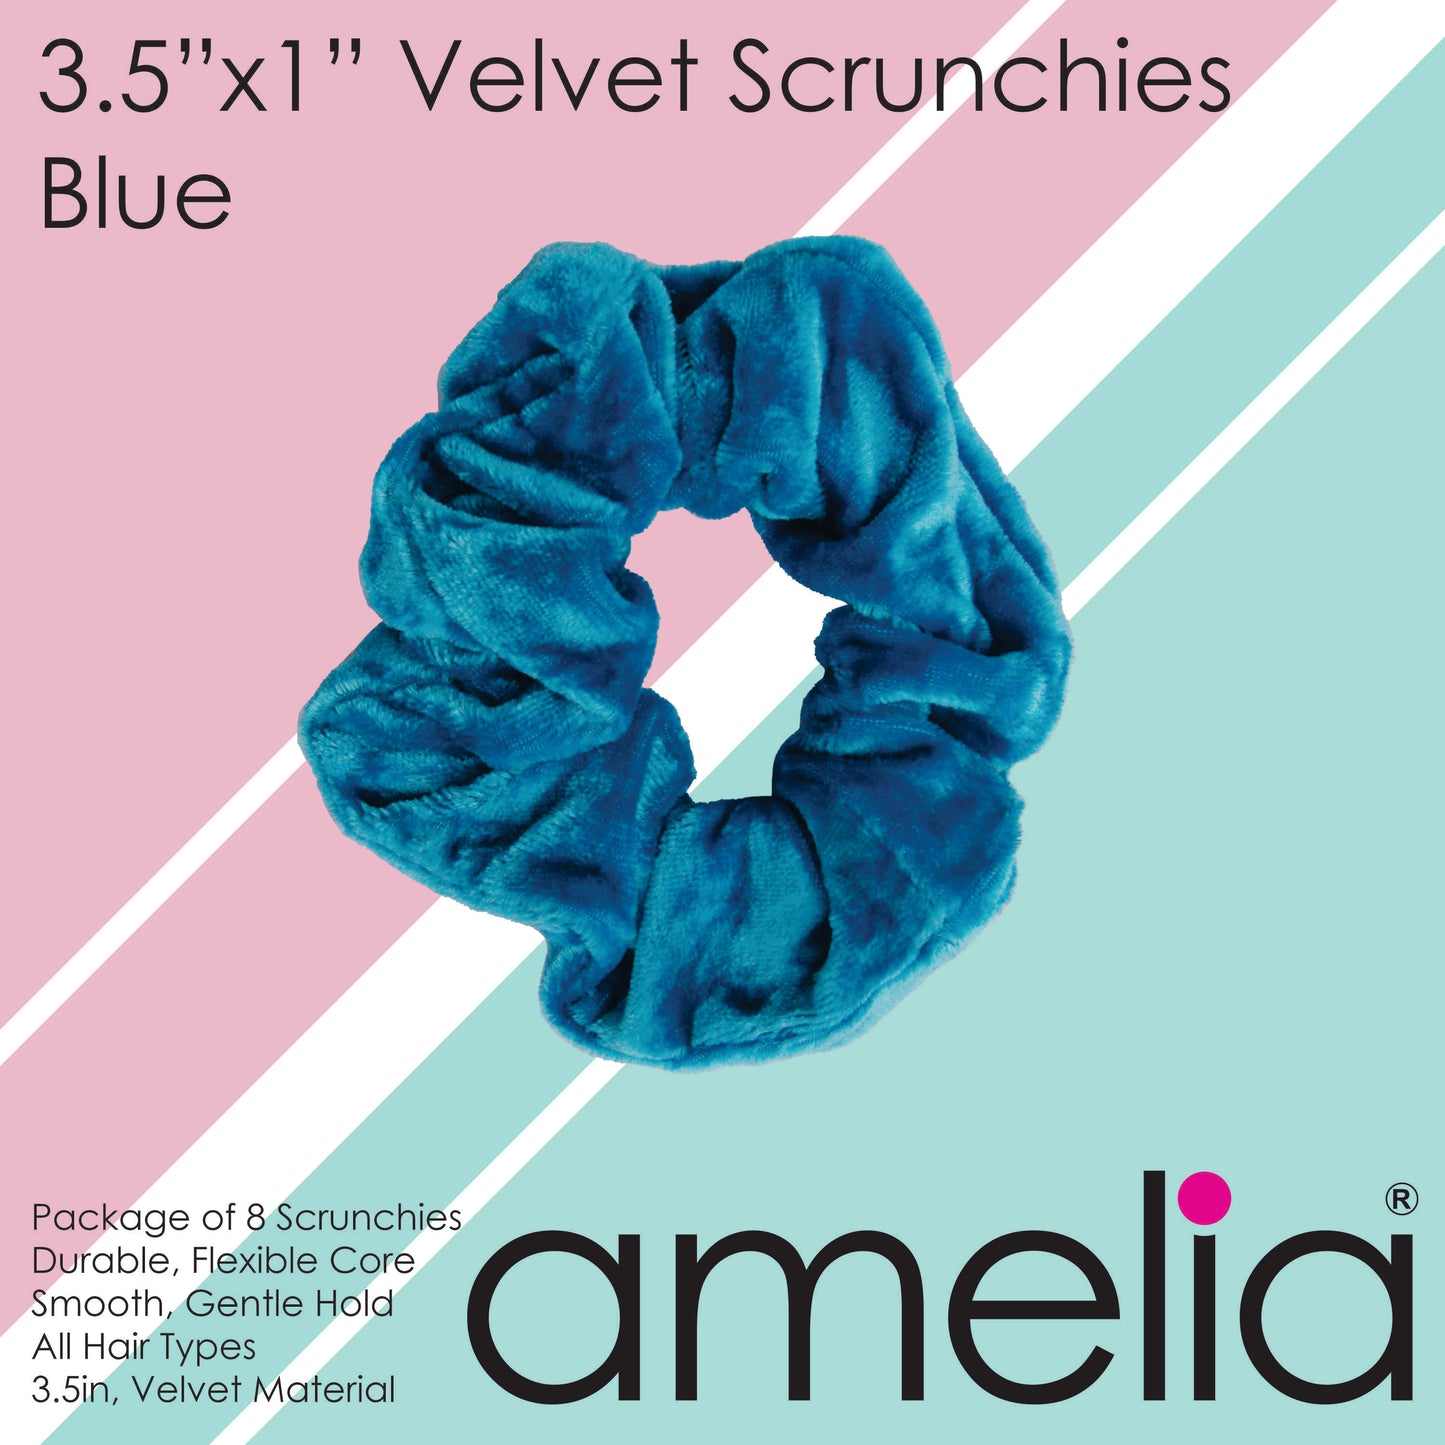 Amelia Beauty, Blue Velvet Scrunchies, 3.5in Diameter, Gentle on Hair, Strong Hold, No Snag, No Dents or Creases. 8 Pack